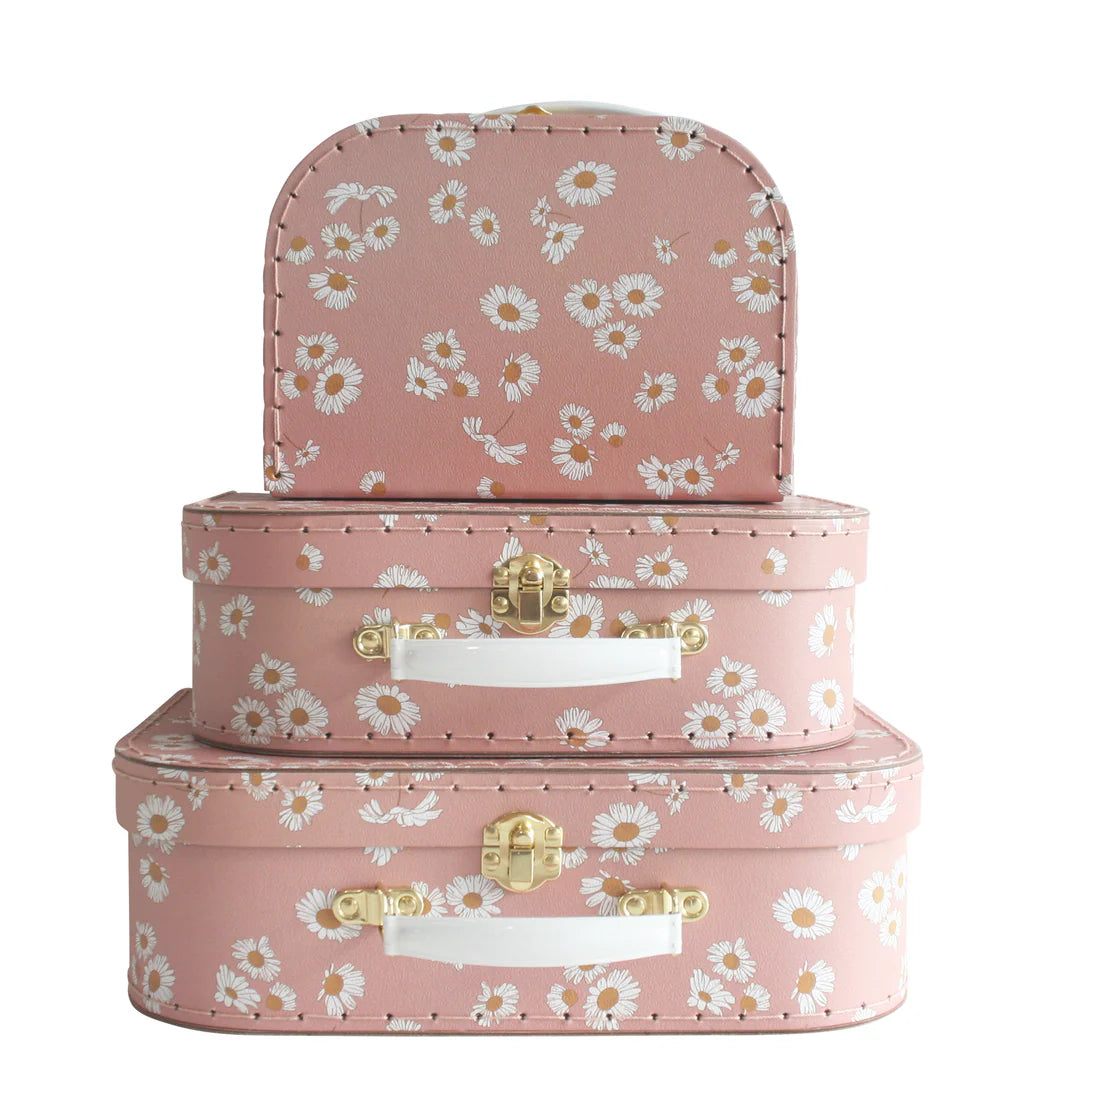 Alimrose Daisy Days Carry Cases - sold separately